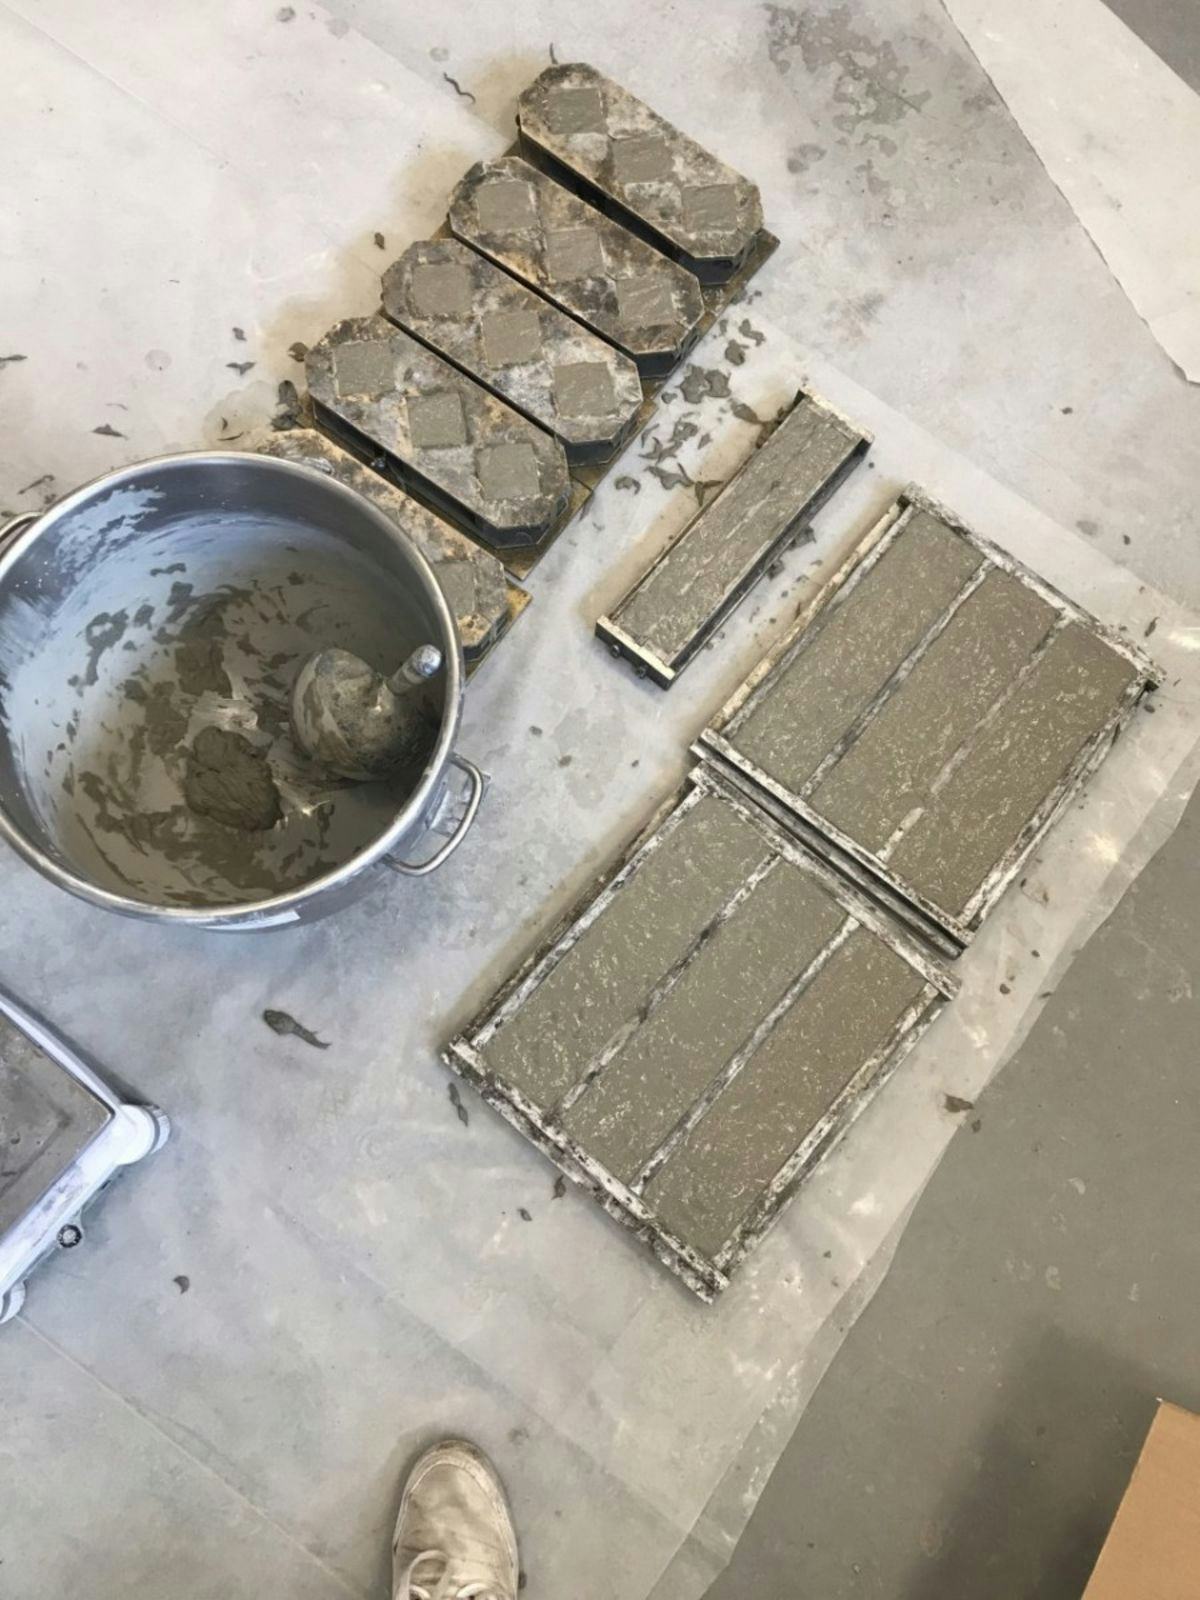 A photo of the casts filled with concrete.